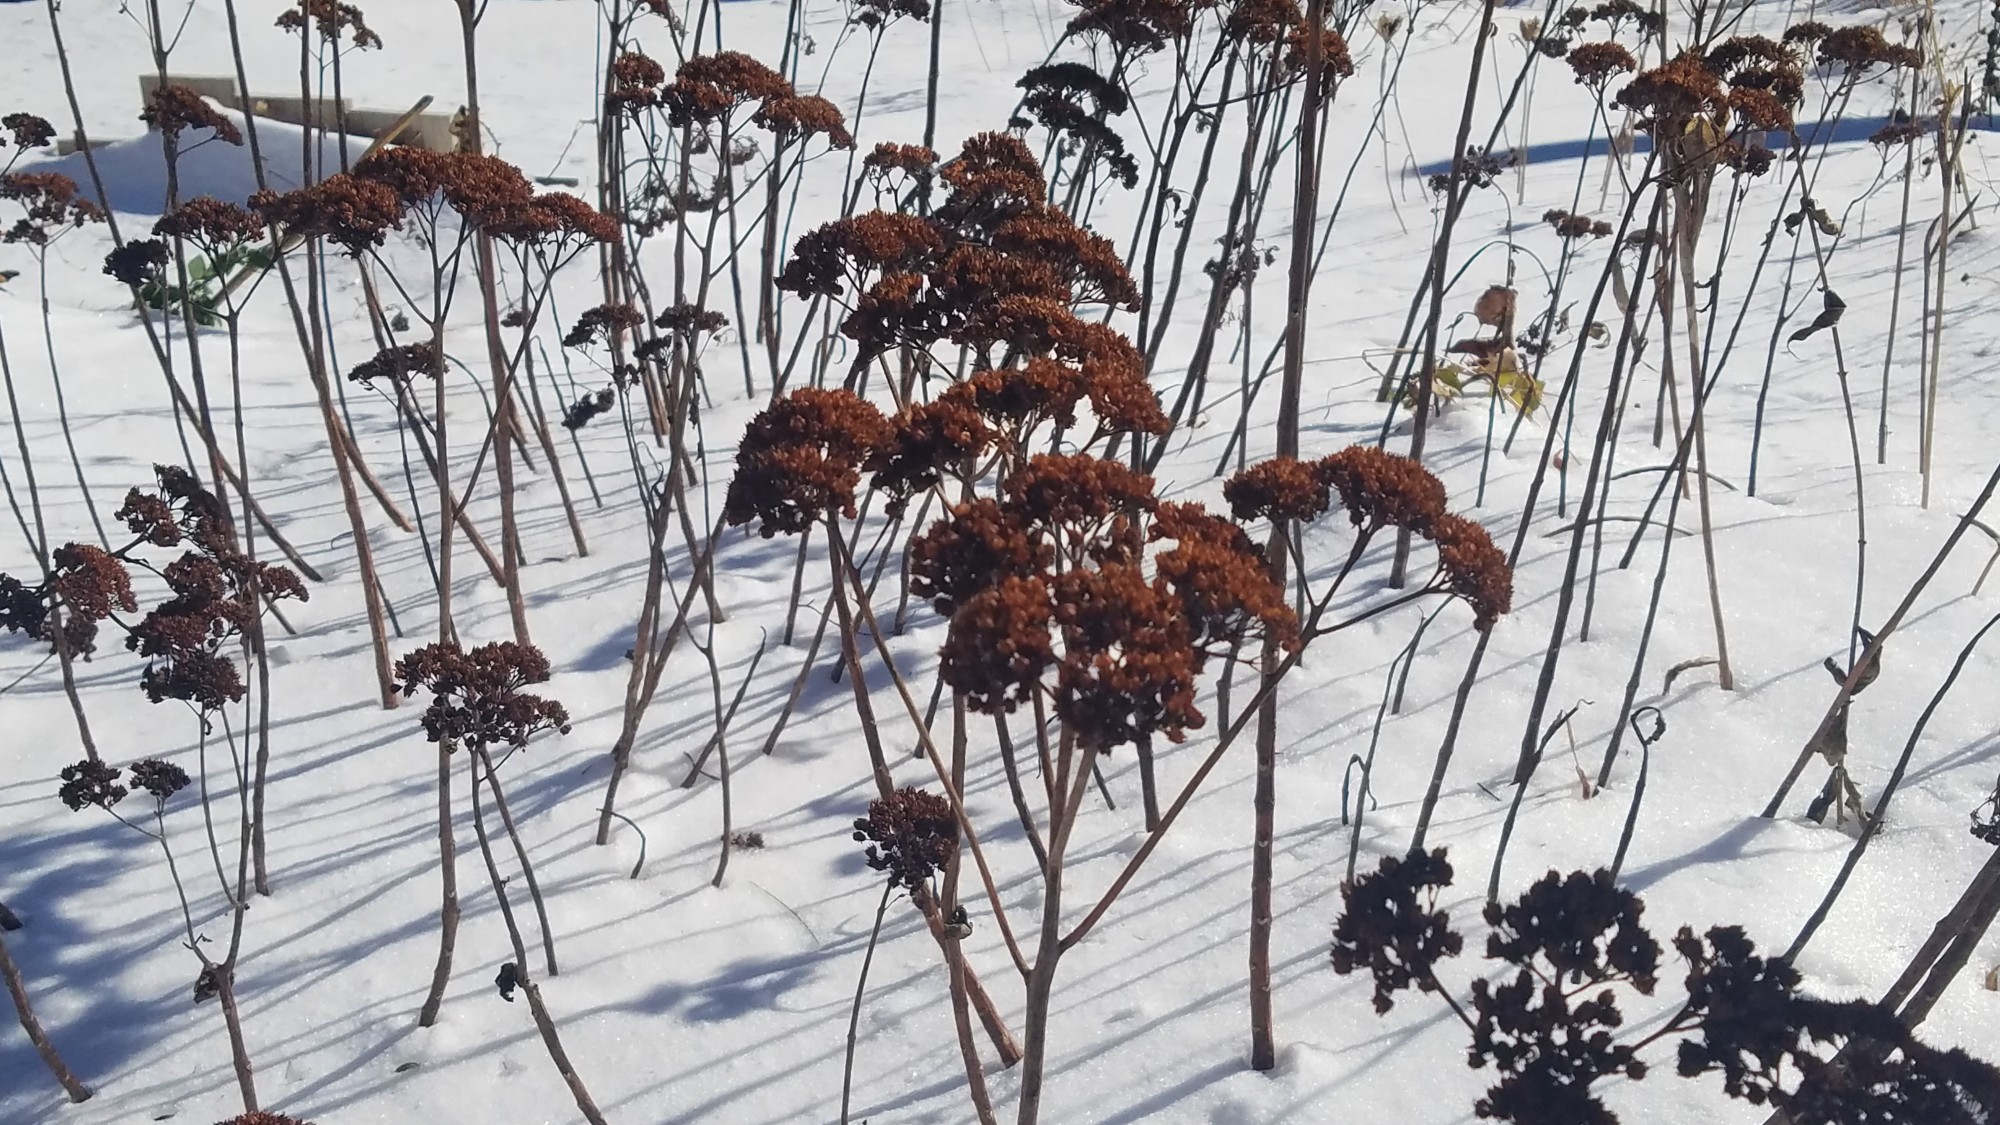 Flower seed stalks in the snow